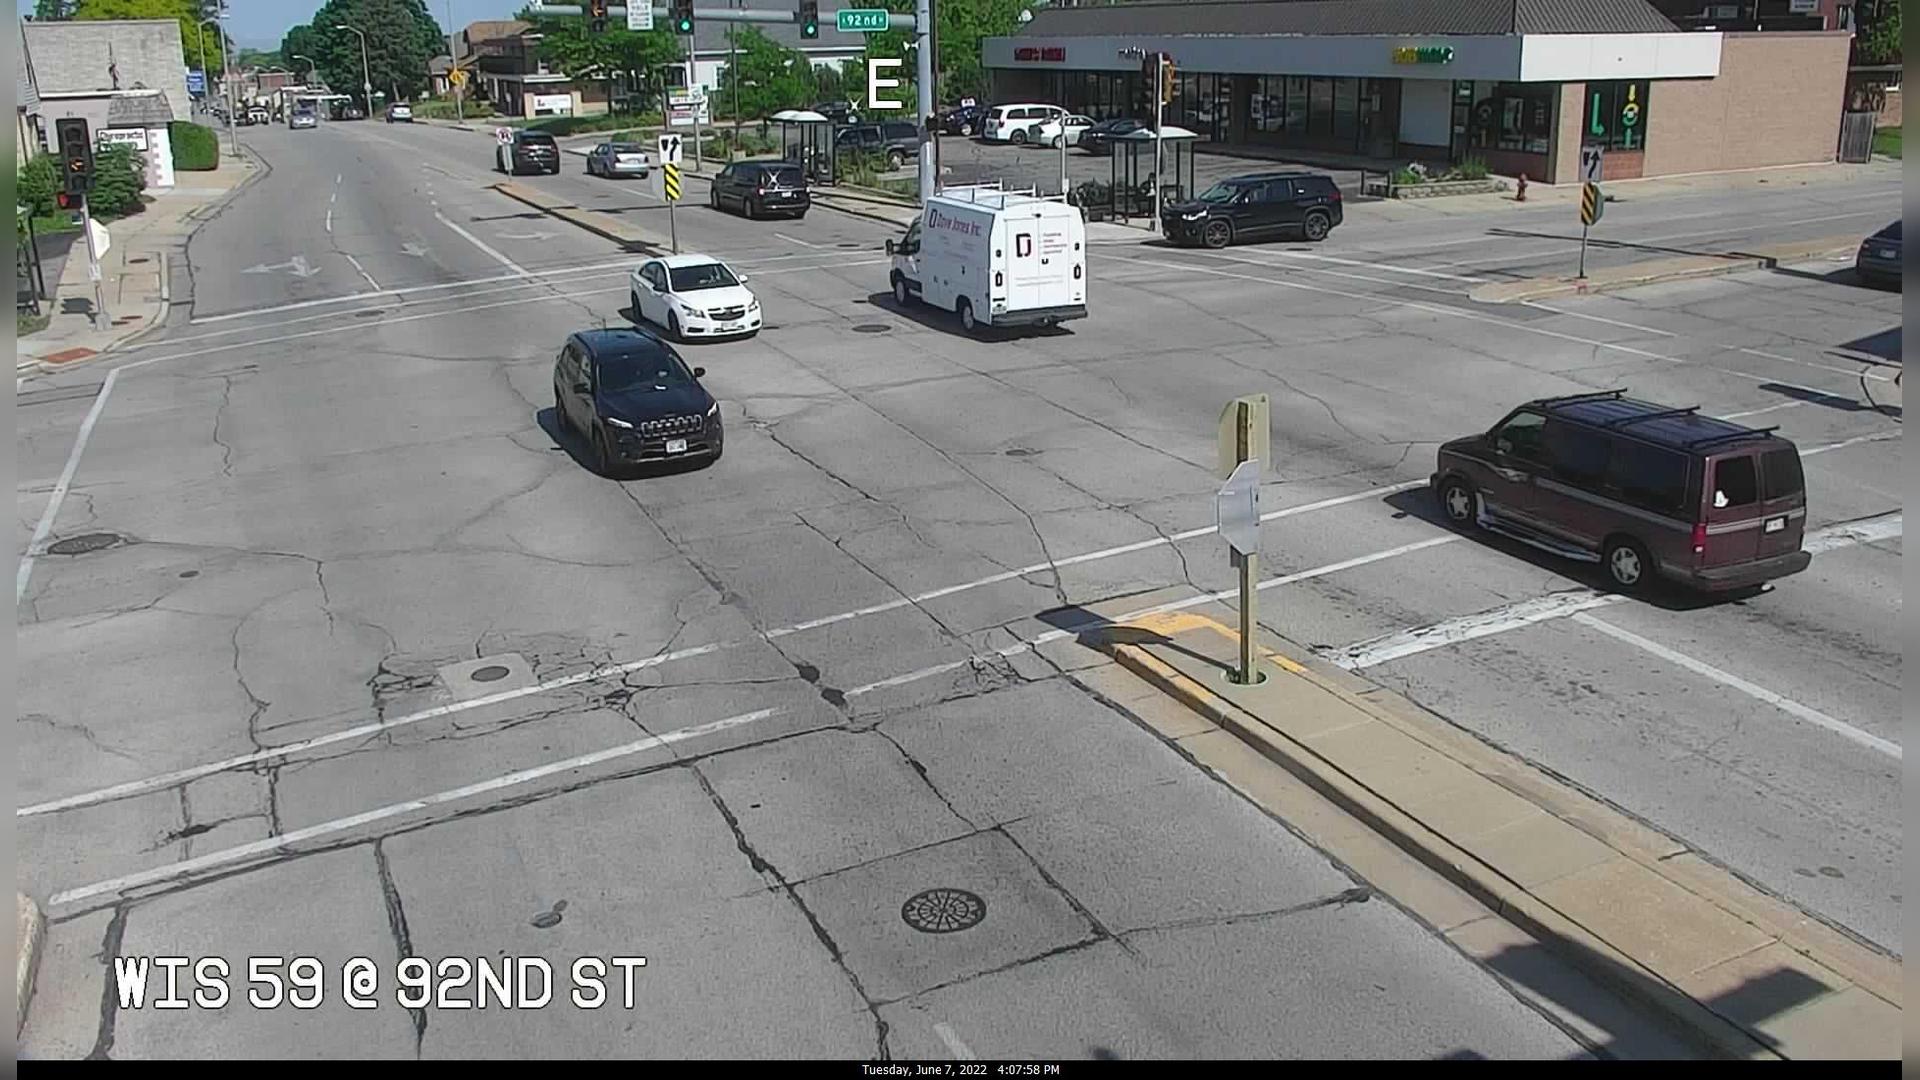 Traffic Cam West Allis: Greenfield Ave @ nd St Player